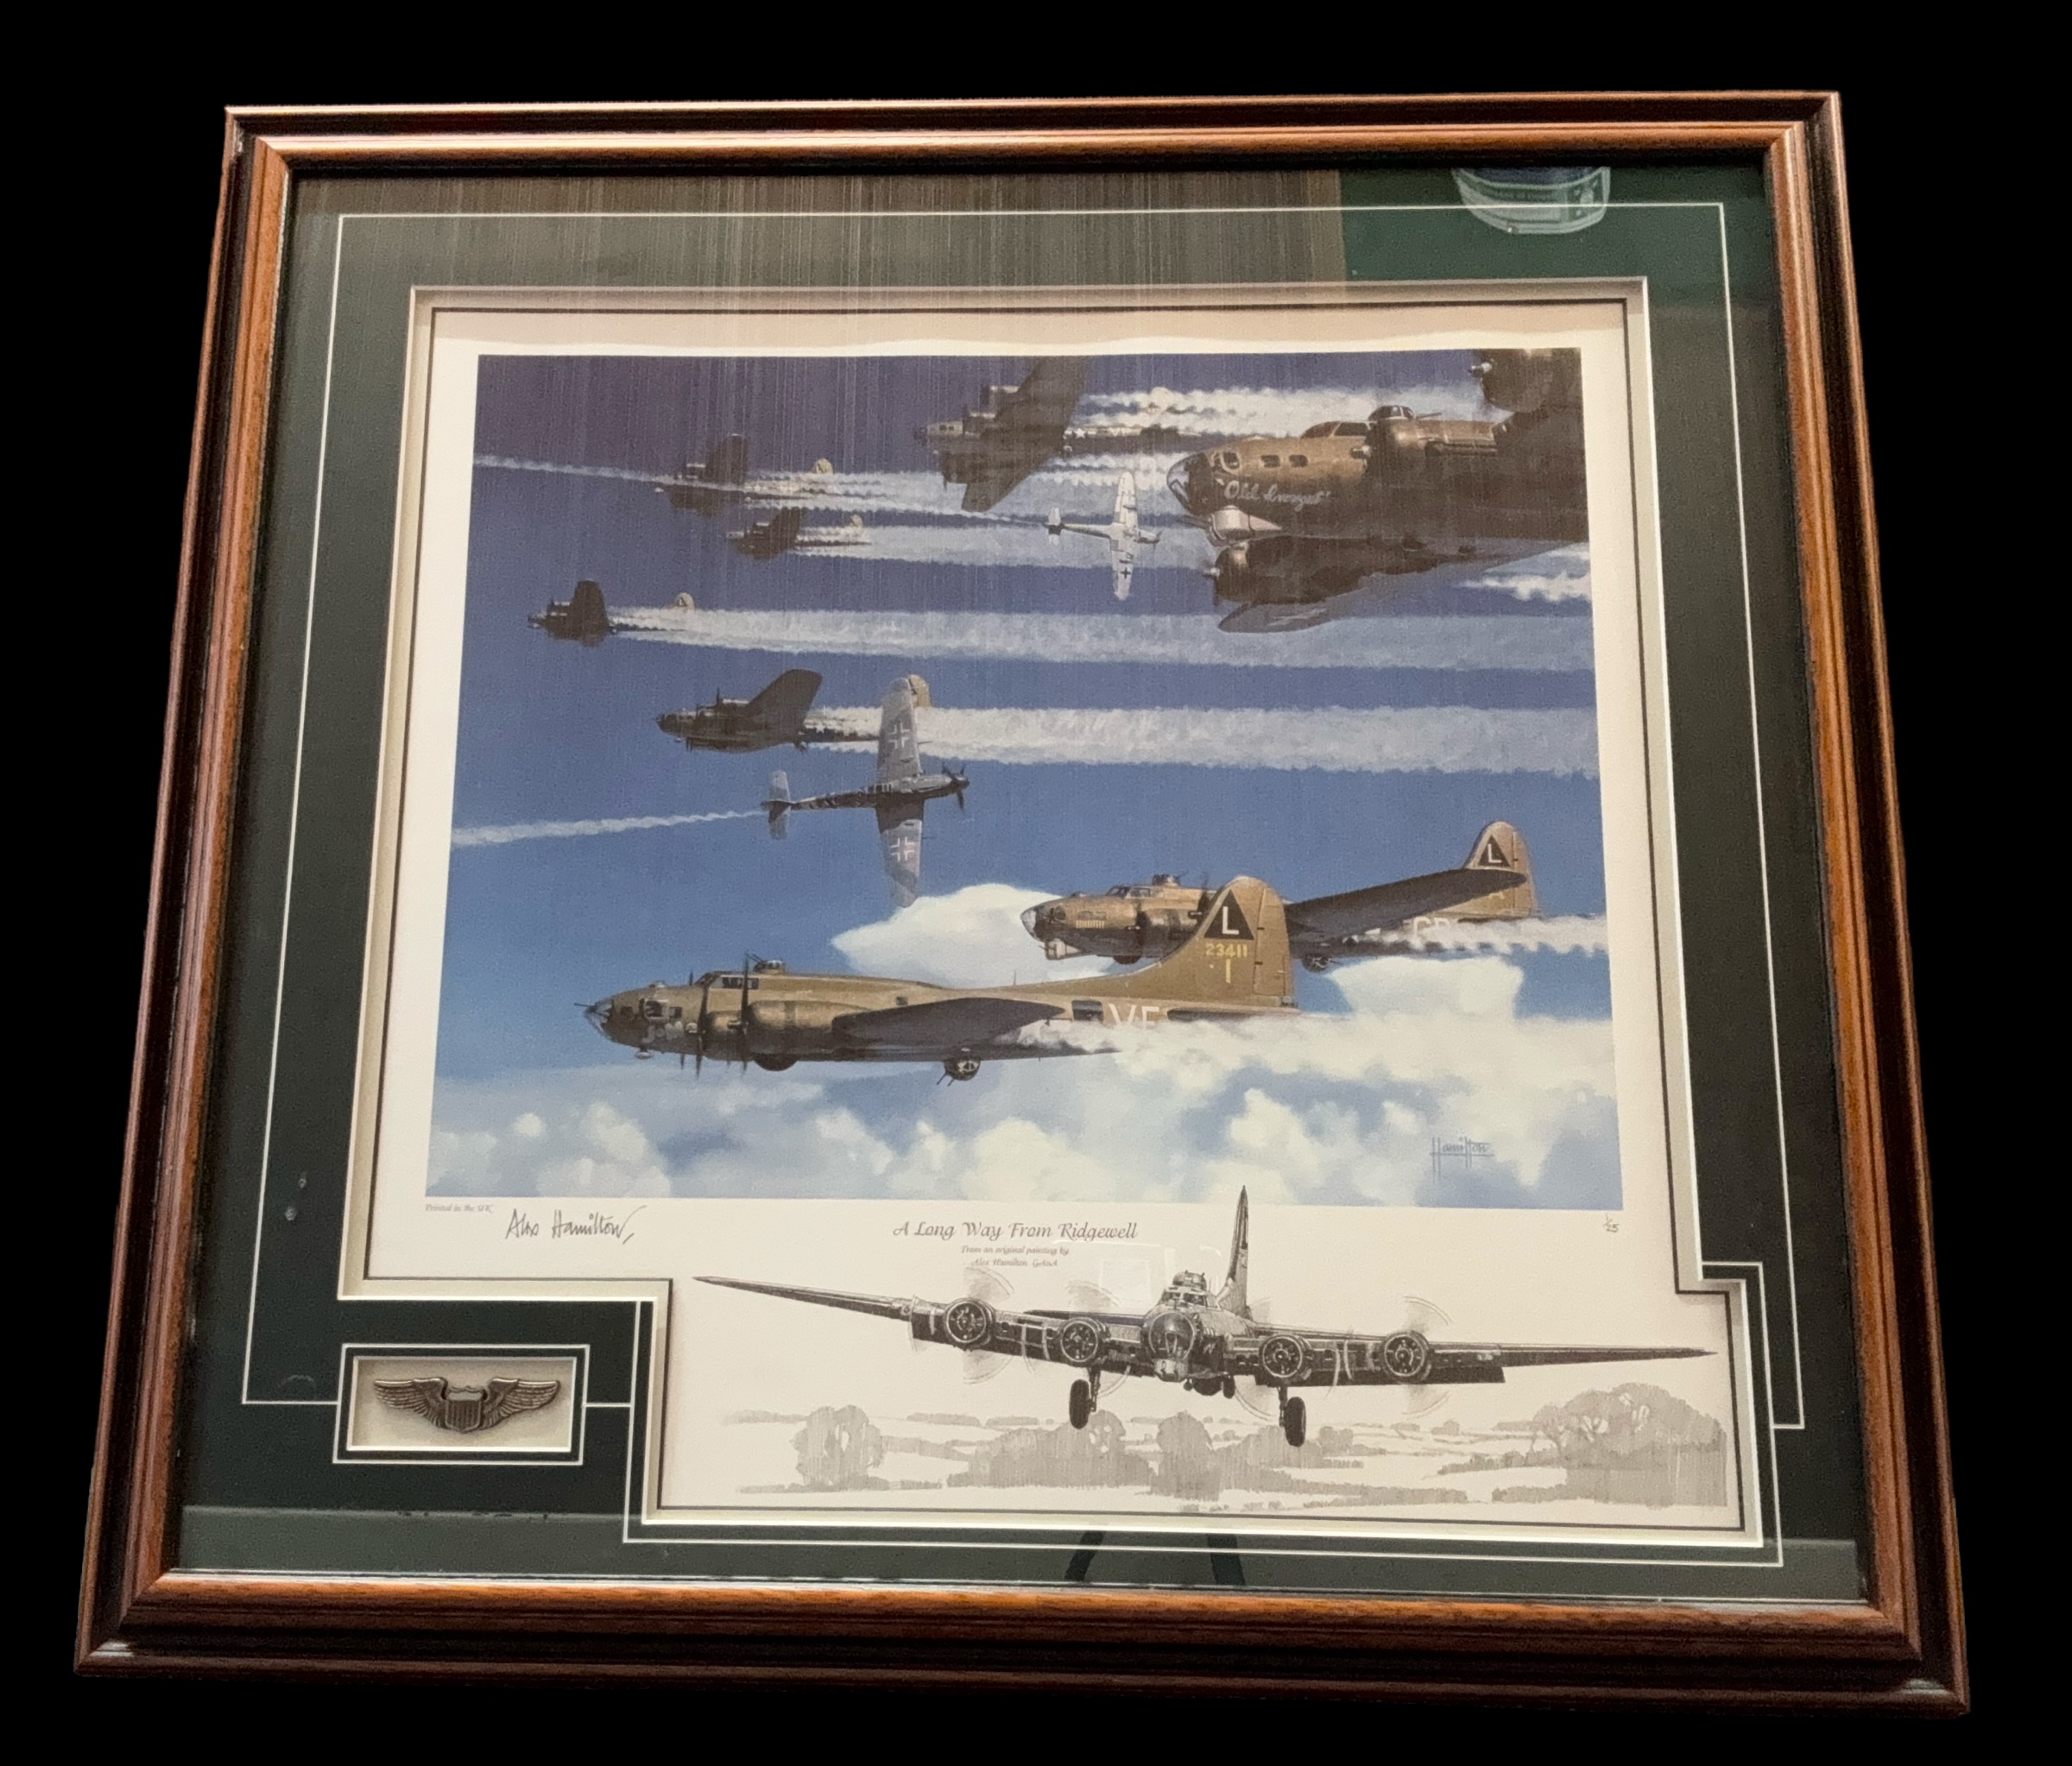 WW2 Print titled A Long Way from Ridgewell by Alex Hamilton. Limited 1/25, signed by the artist Alex